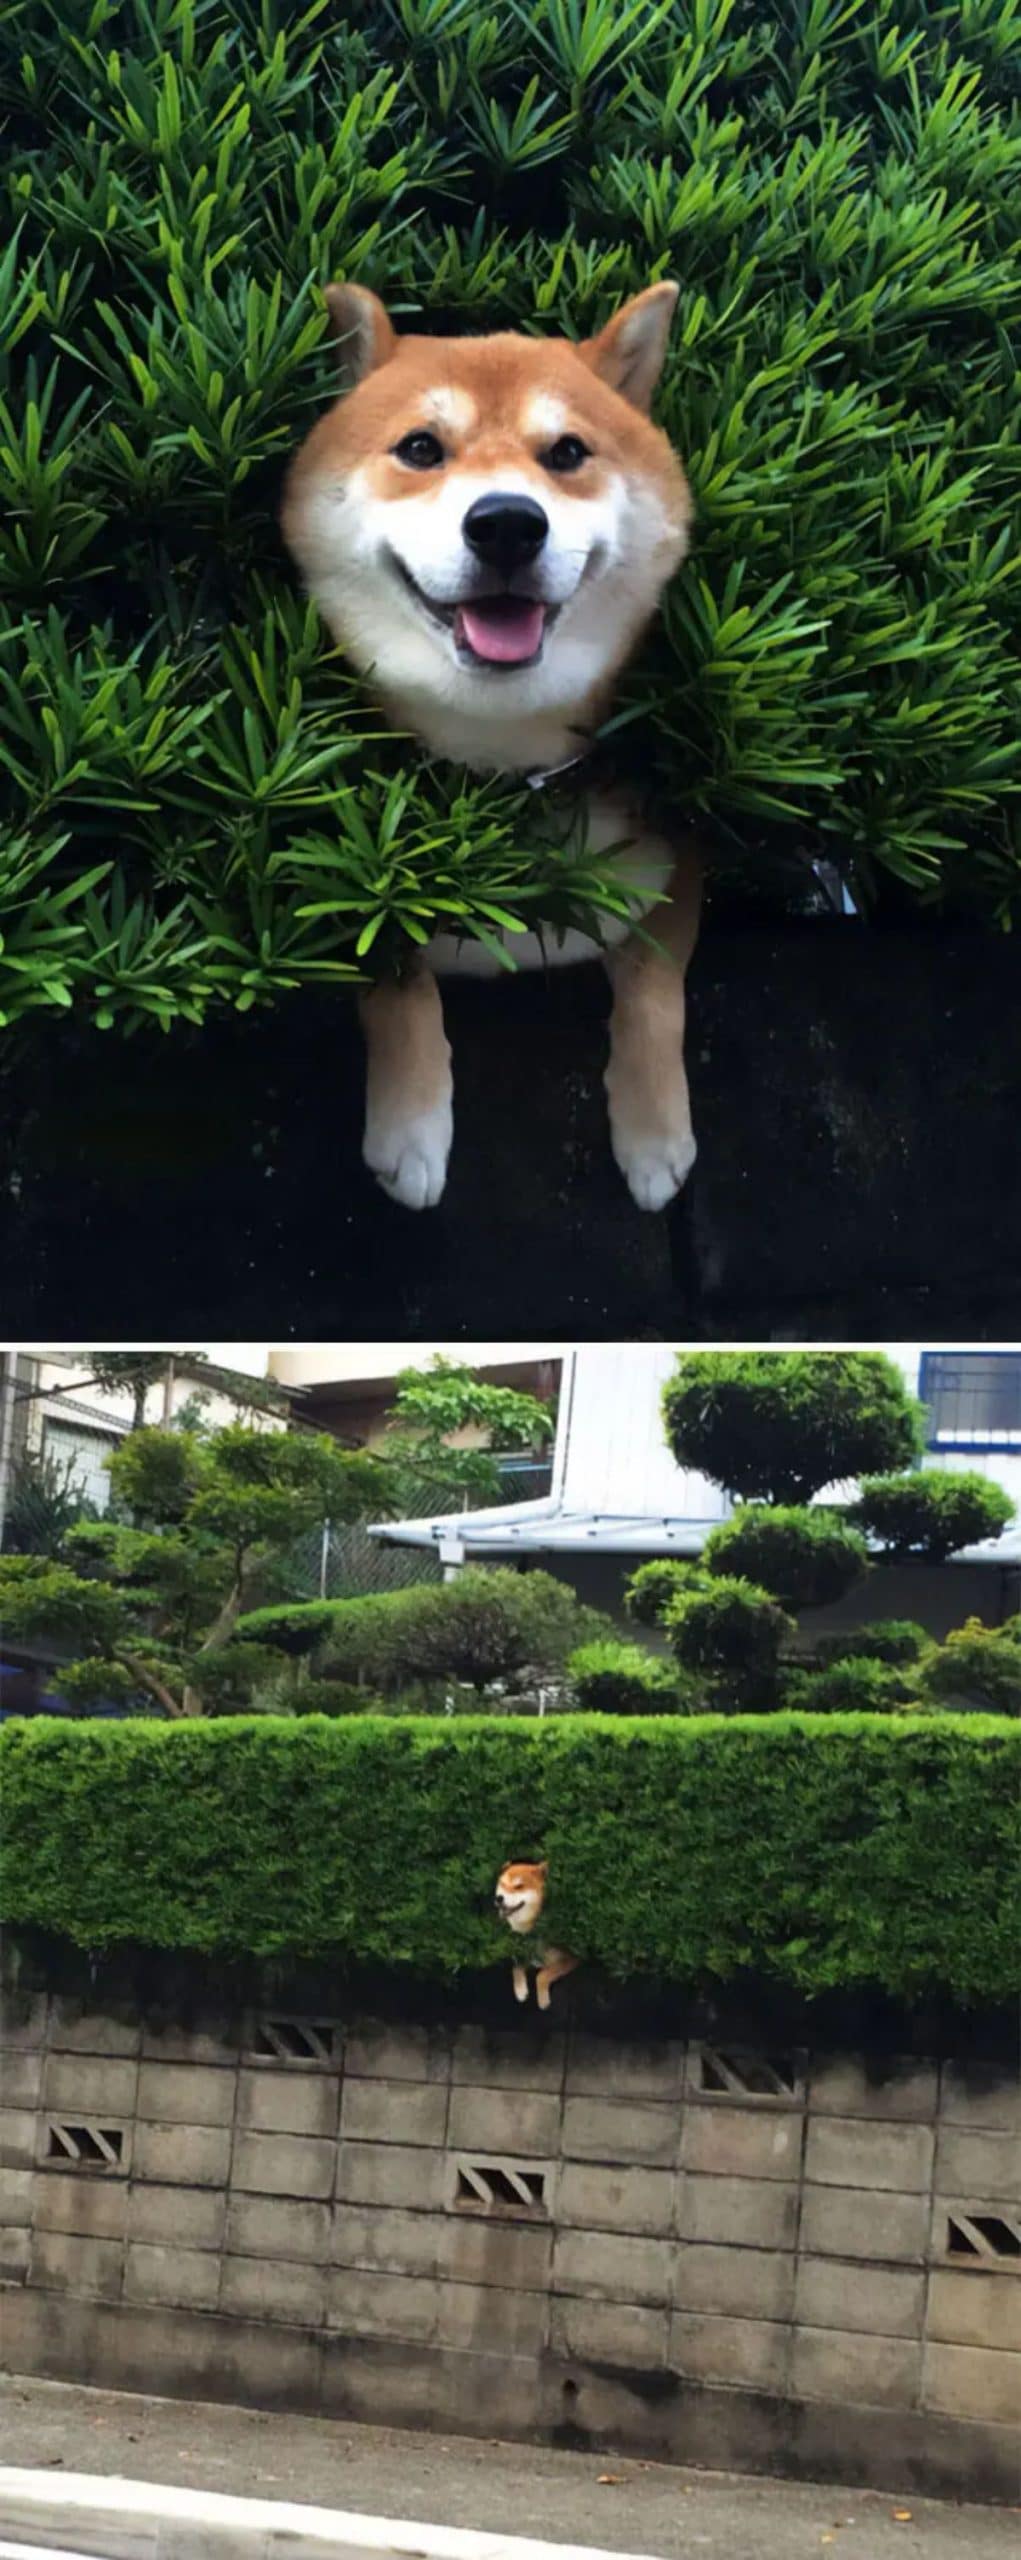 2 photos of a brown and white shiba inu stuck in a bush